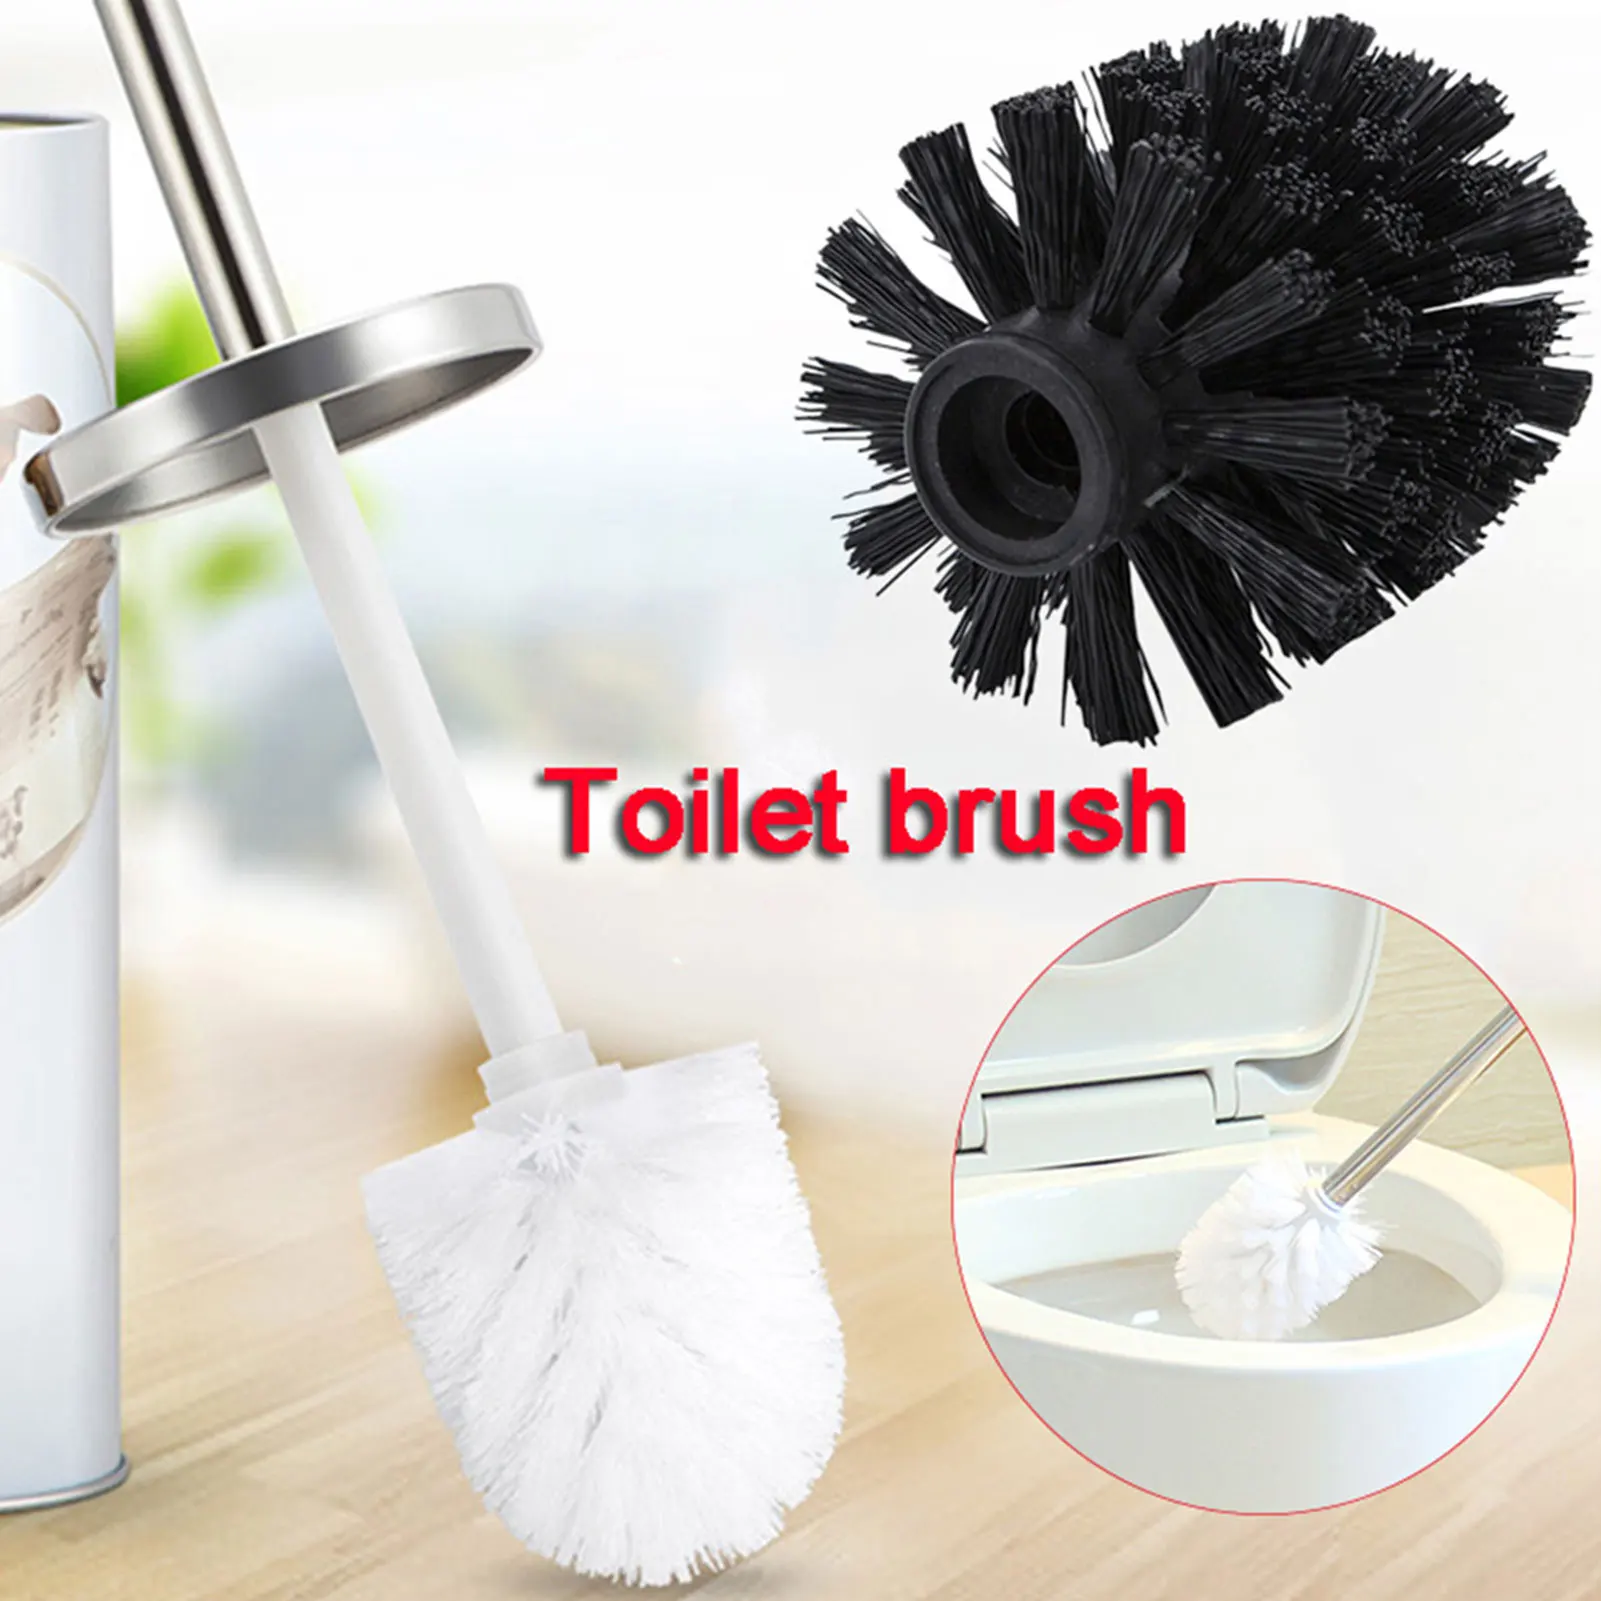 

Universal Toilet Brush Replacement Head Bowl Brush Bathroom WC Cleaning Utensils Accessories Storage with Sturdy Stiff Bristles